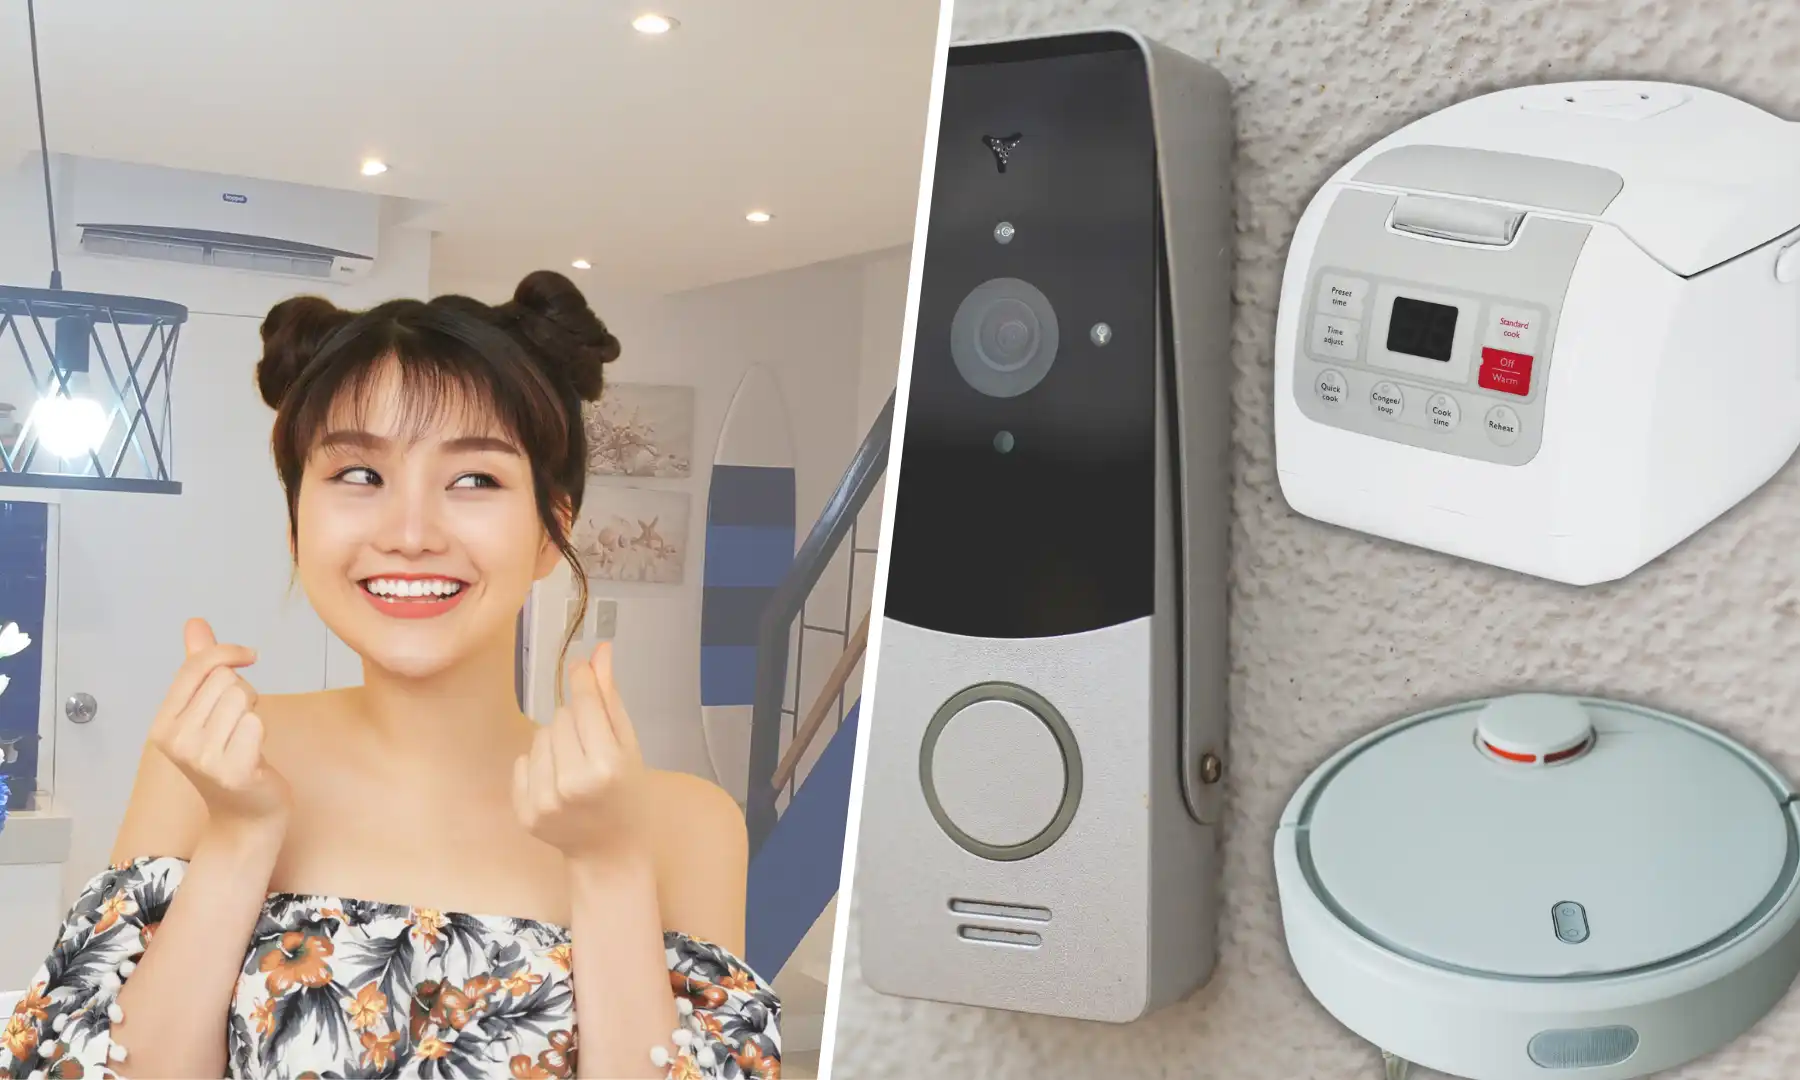 https://www.lumina.com.ph/assets/news-and-blogs-photos/5-Smart-Devices-to-Buy-for-Korean-Drama-Feels-at-Your-Own-Homes/5-Smart-Devices-to-Buy-for-Korean-Drama-Feels-at-Your-Own-Homes.webp